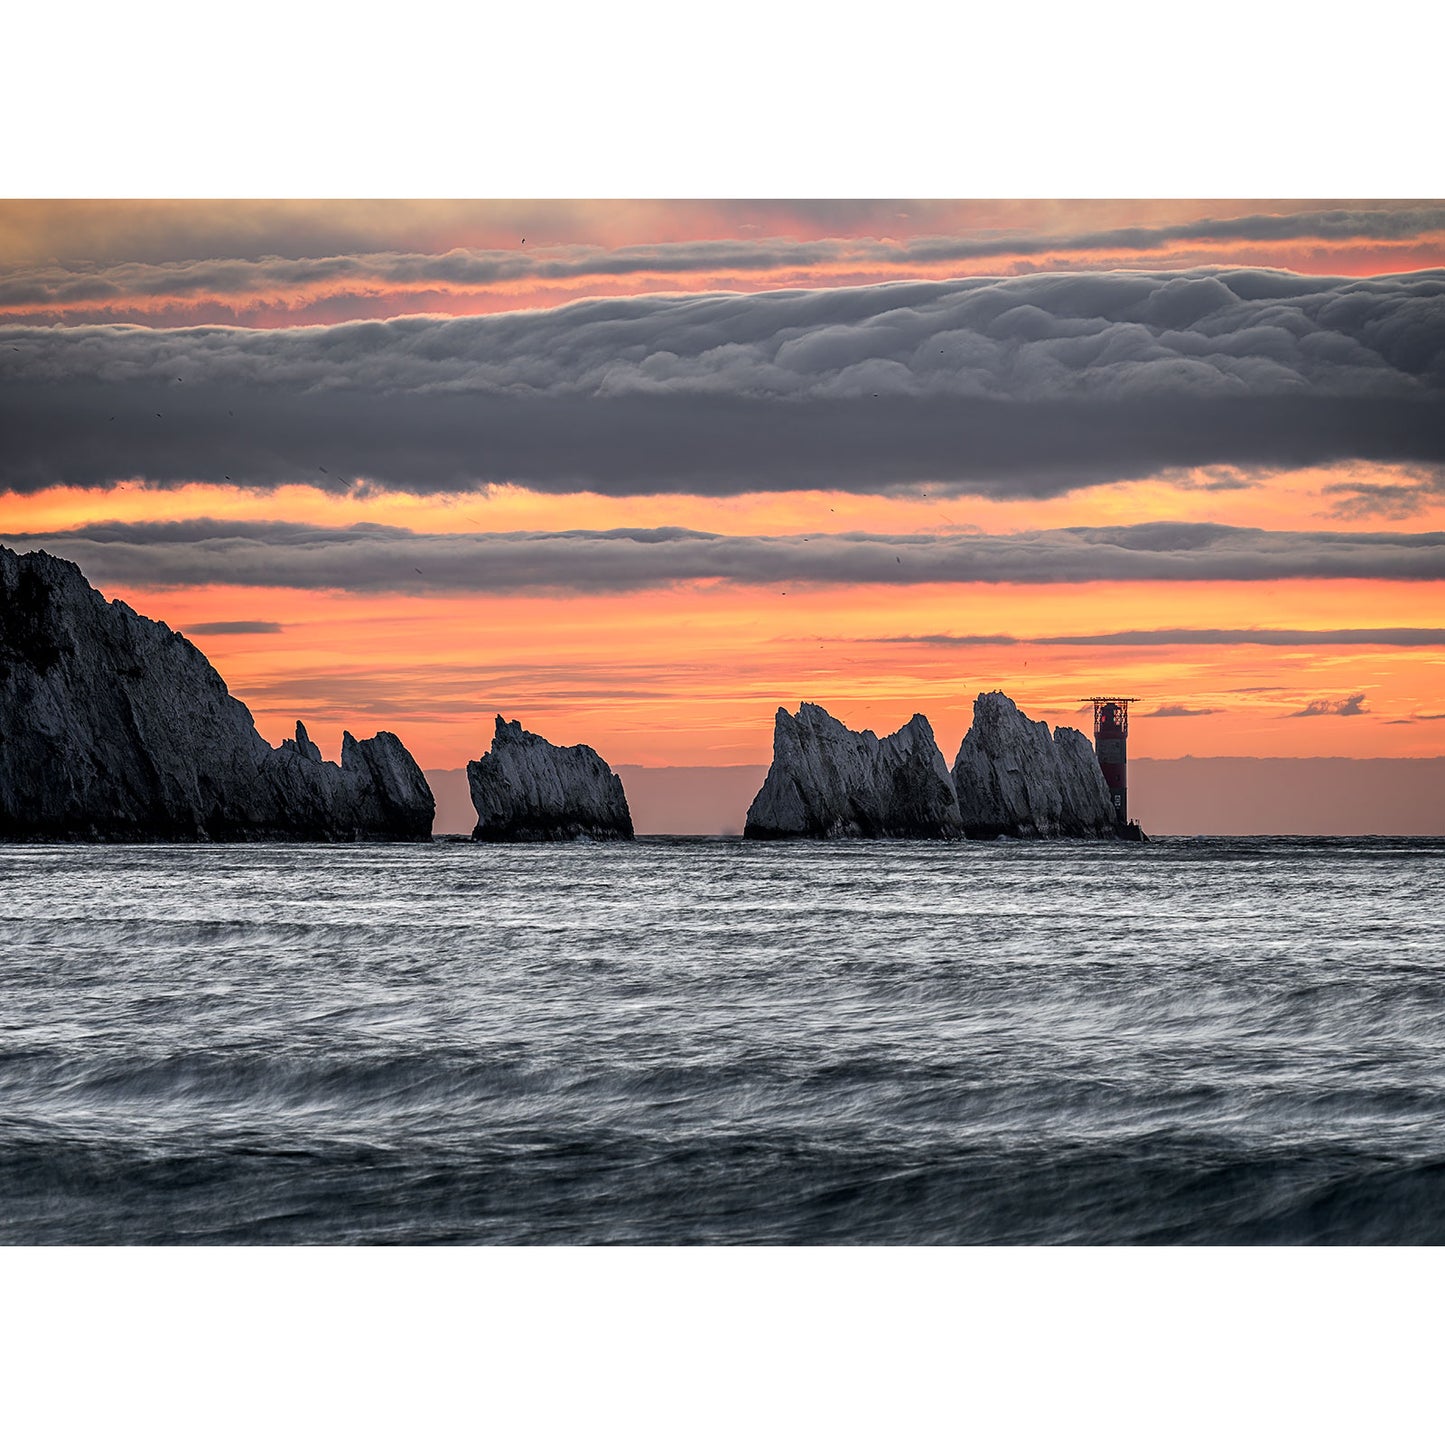 Dramatic sunset over rugged cliffs by the sea with layered clouds in the sky at Gascoigne captured by The Needles from Available Light Photography.